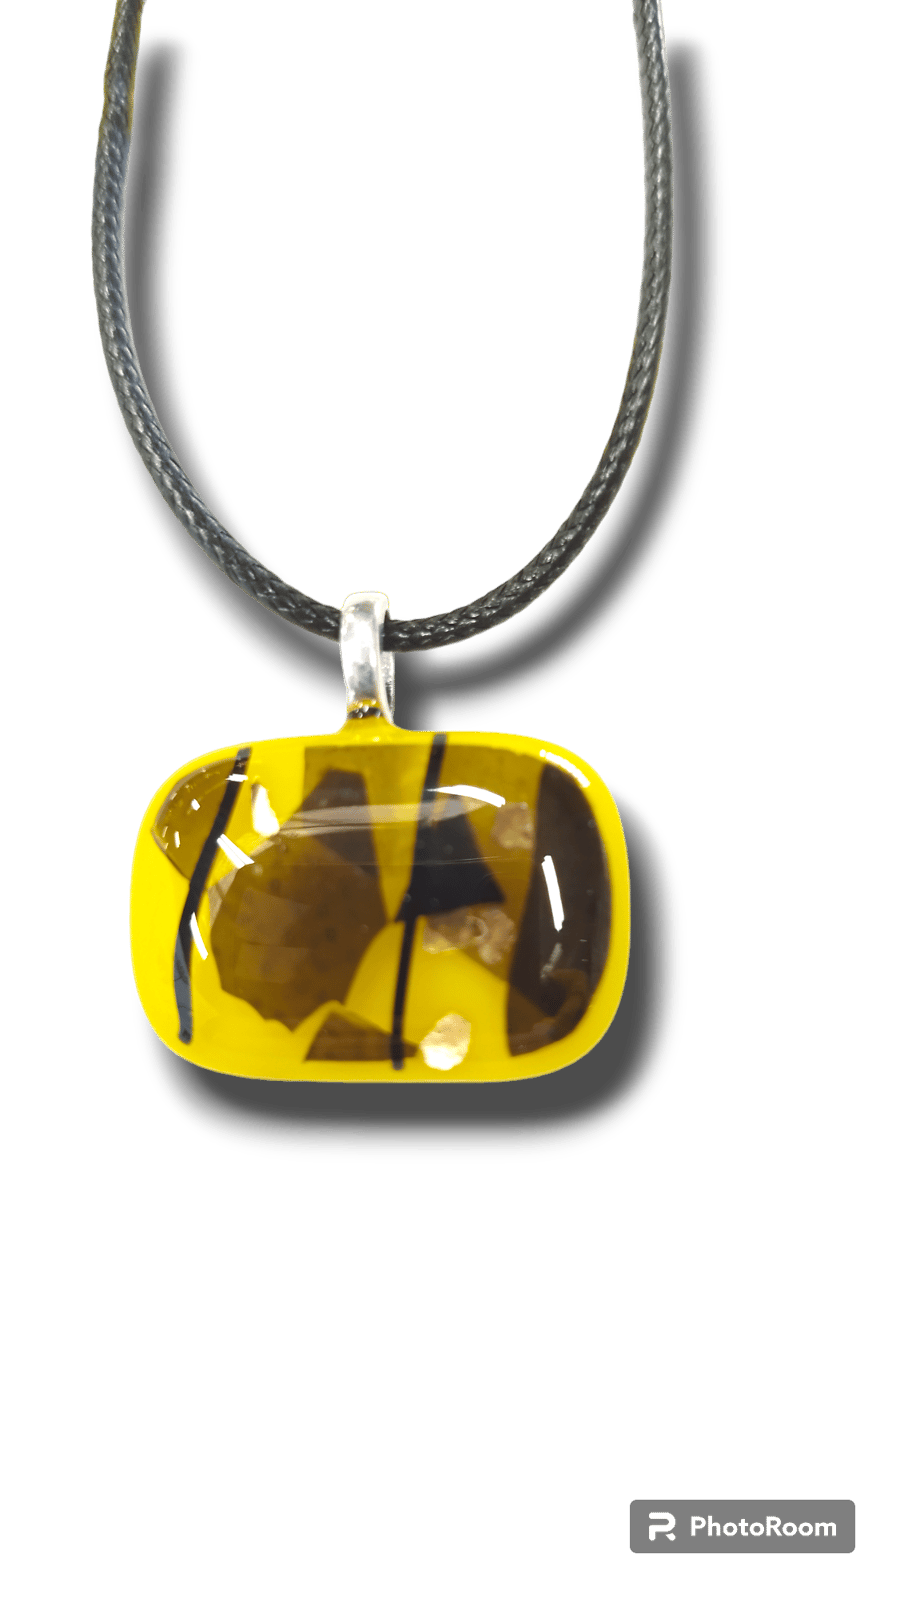 Fused glass pendant that shines yellow with black as a contrast. Unique 